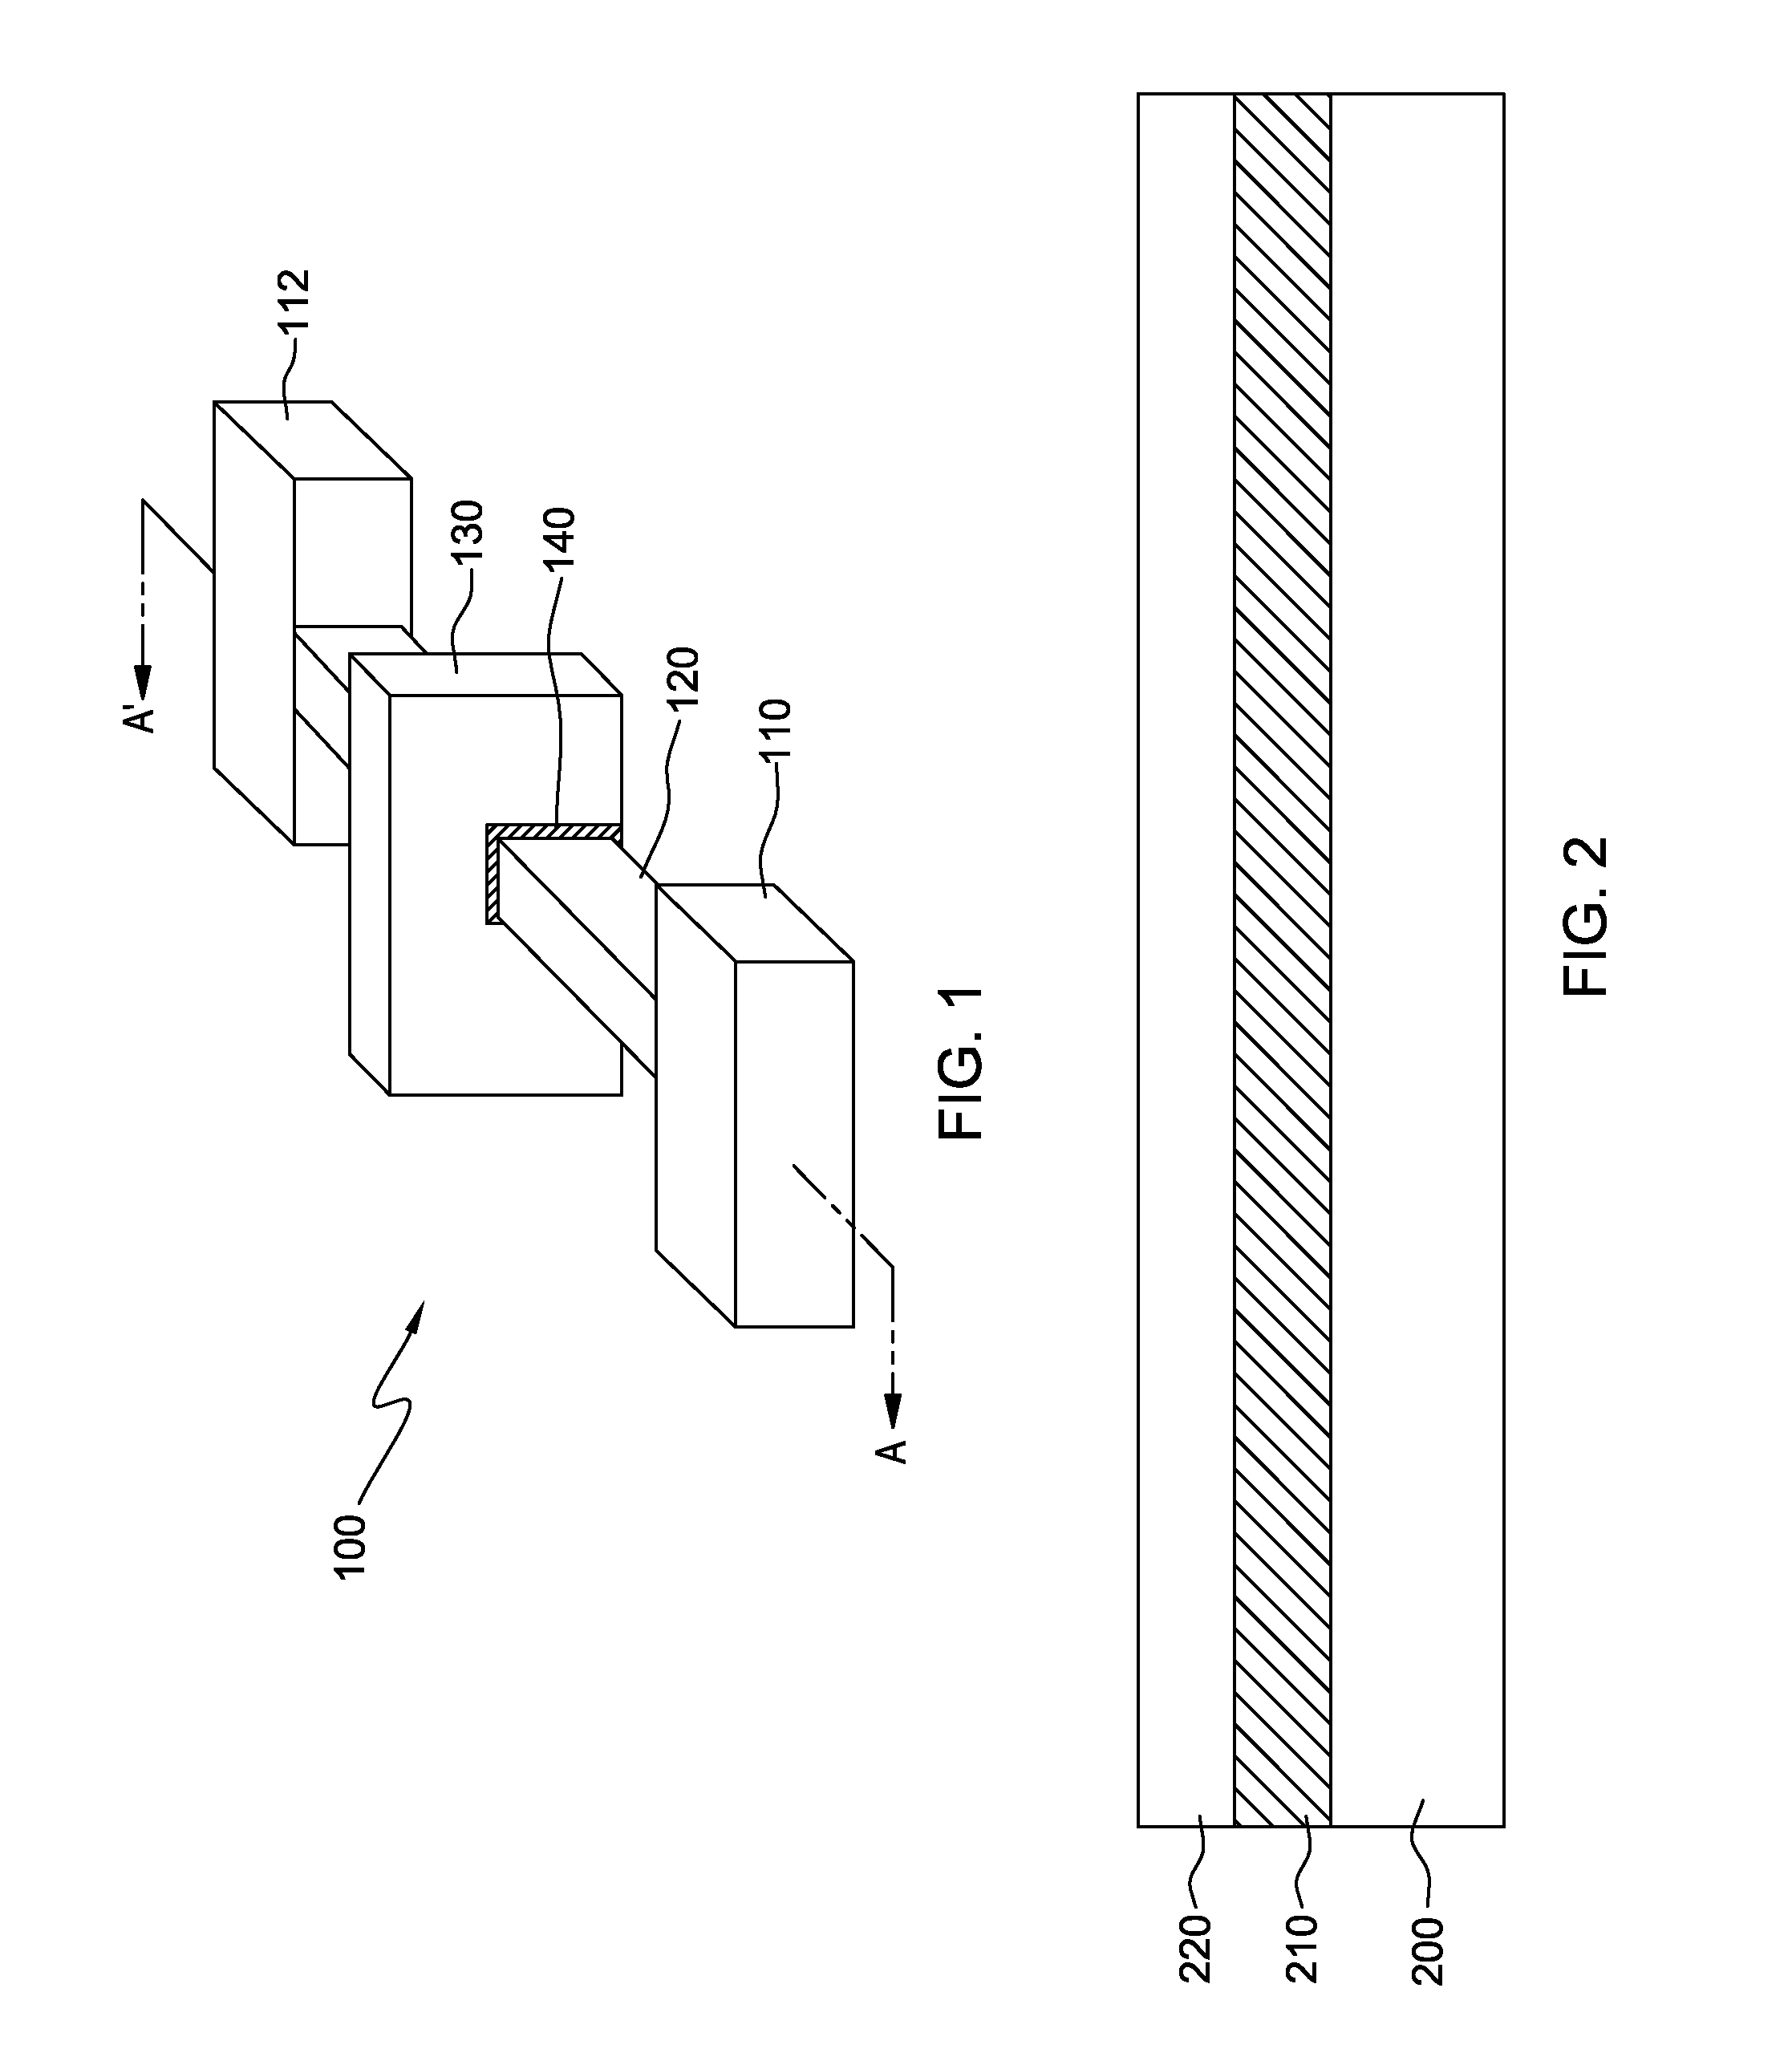 Process variability tolerant hard mask for replacement metal gate finFET devices